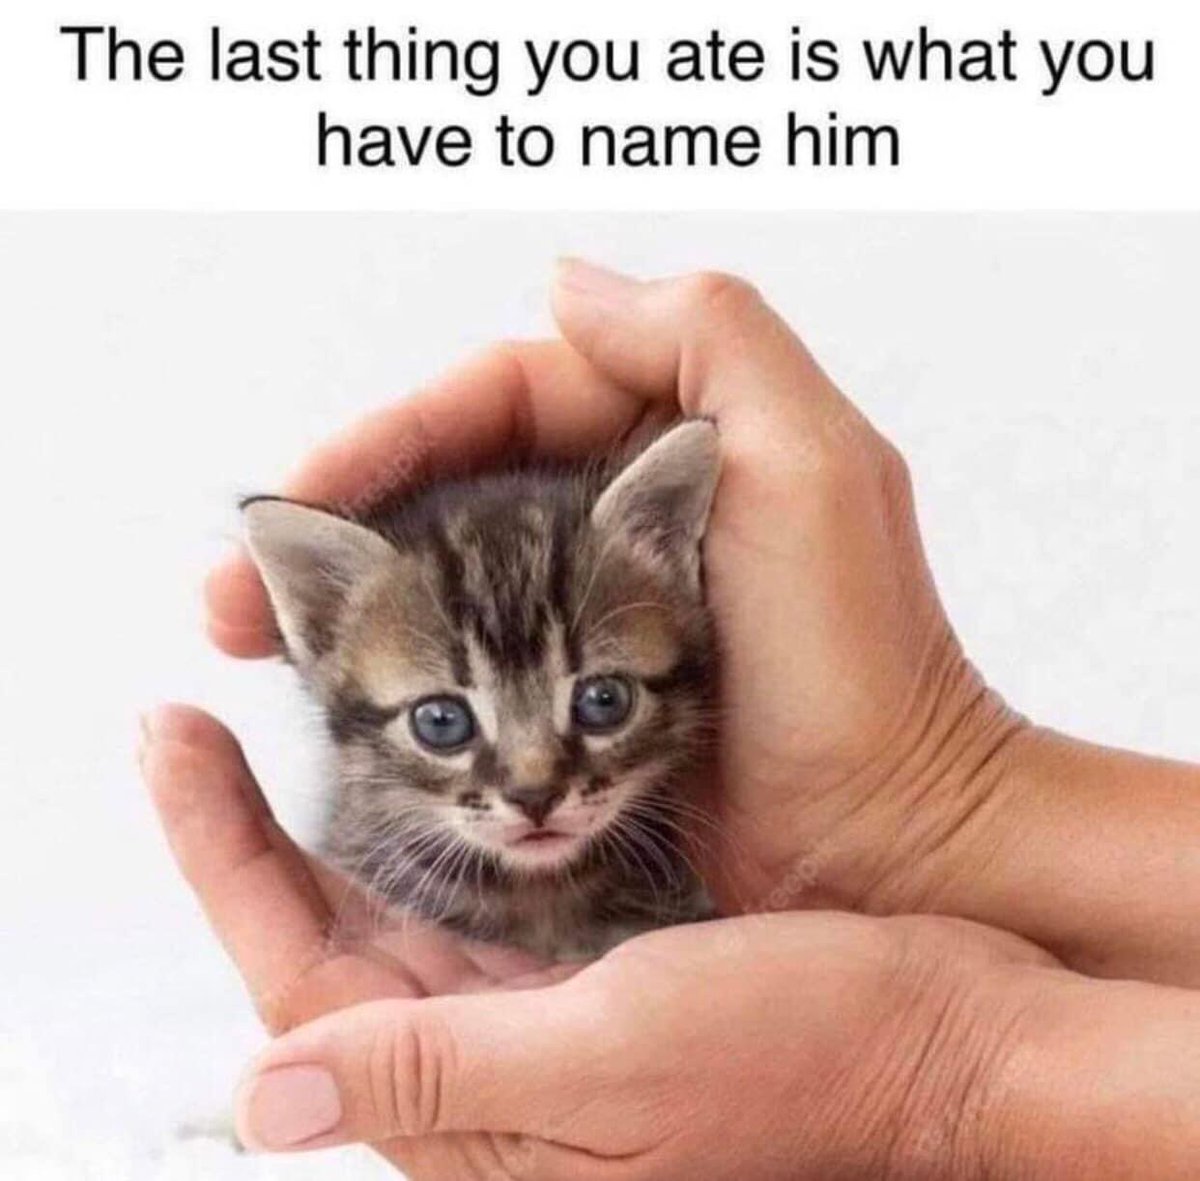 What would your kitten's name be?